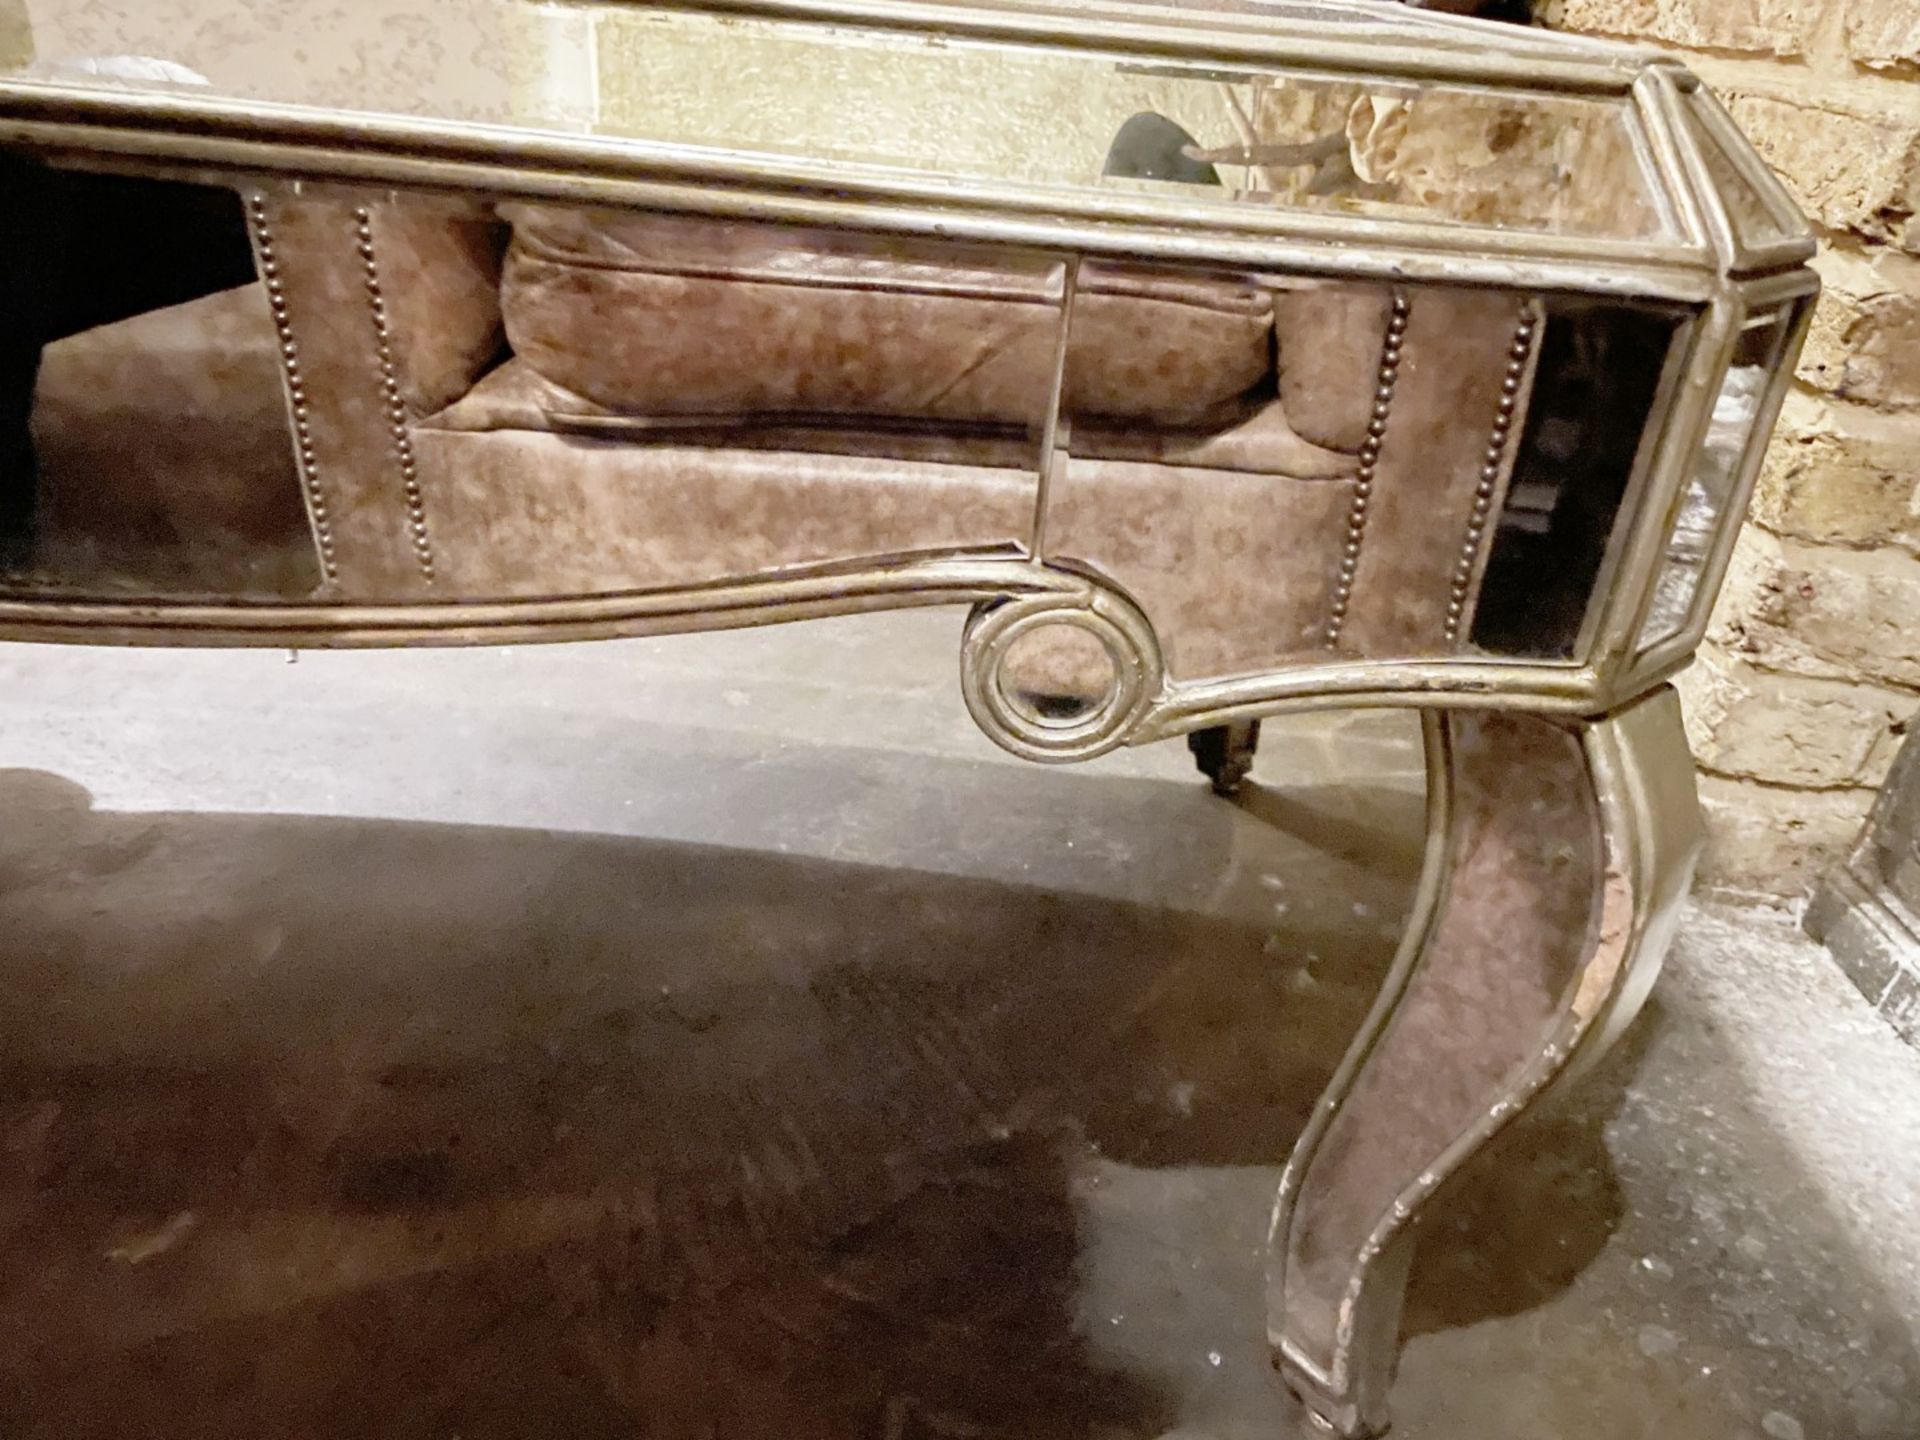 1 x Vintage French-style Mirrored Rectangular Cocktail Coffee Table with an Aged Aesthetic - Image 10 of 10